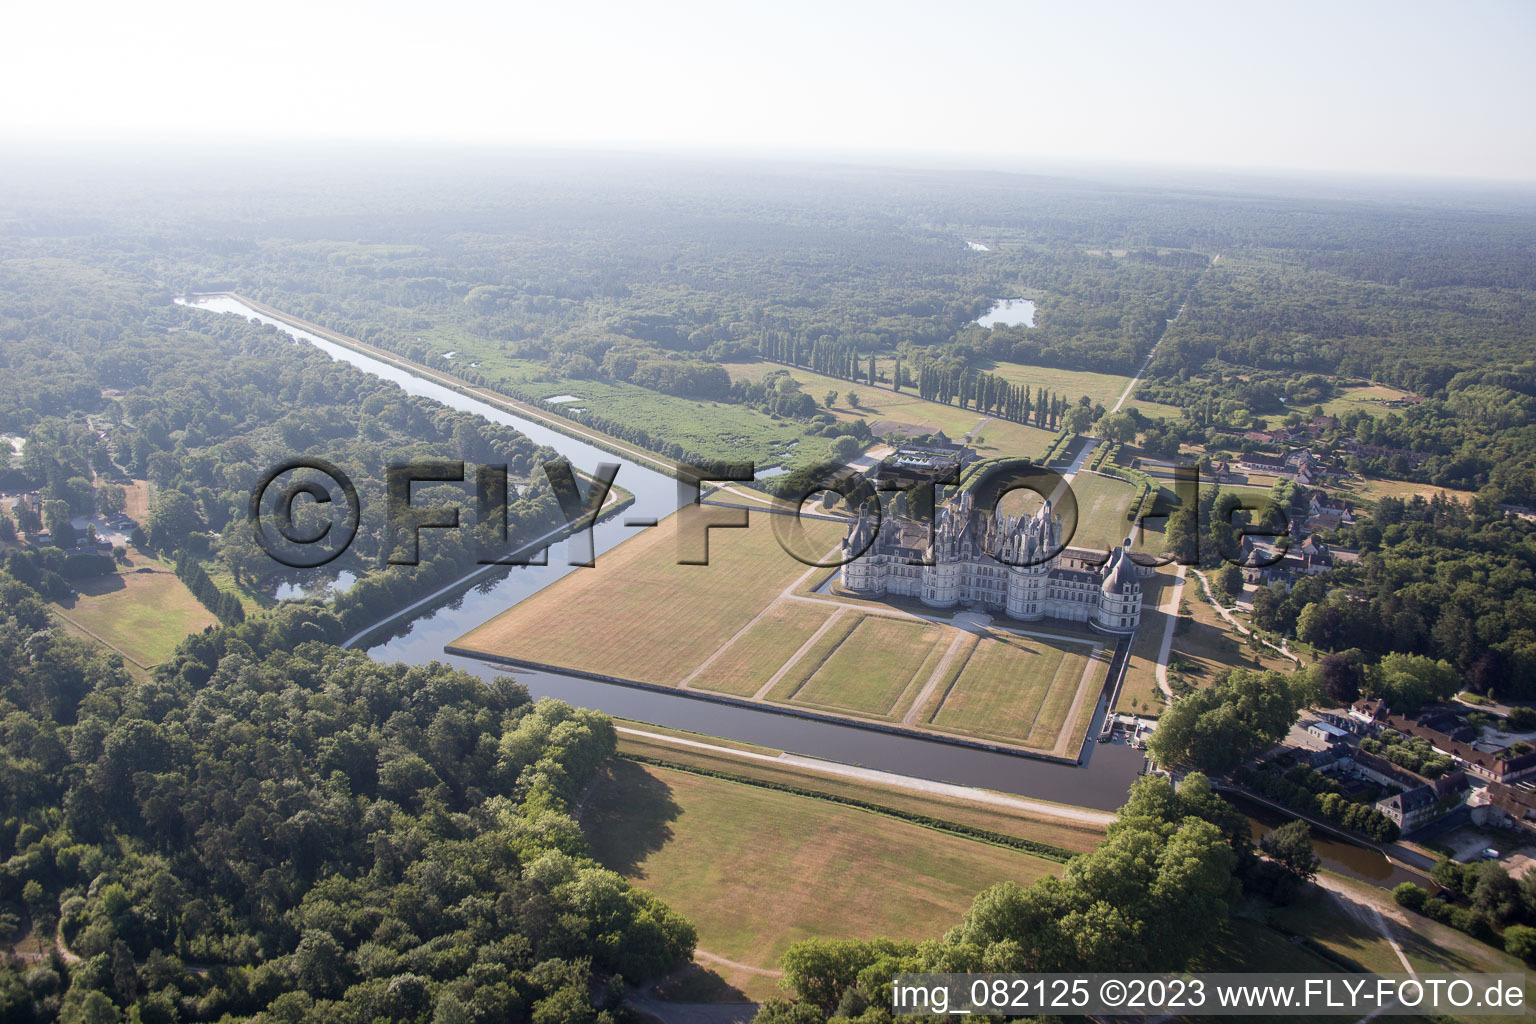 Chambord in the state Loir et Cher, France seen from above